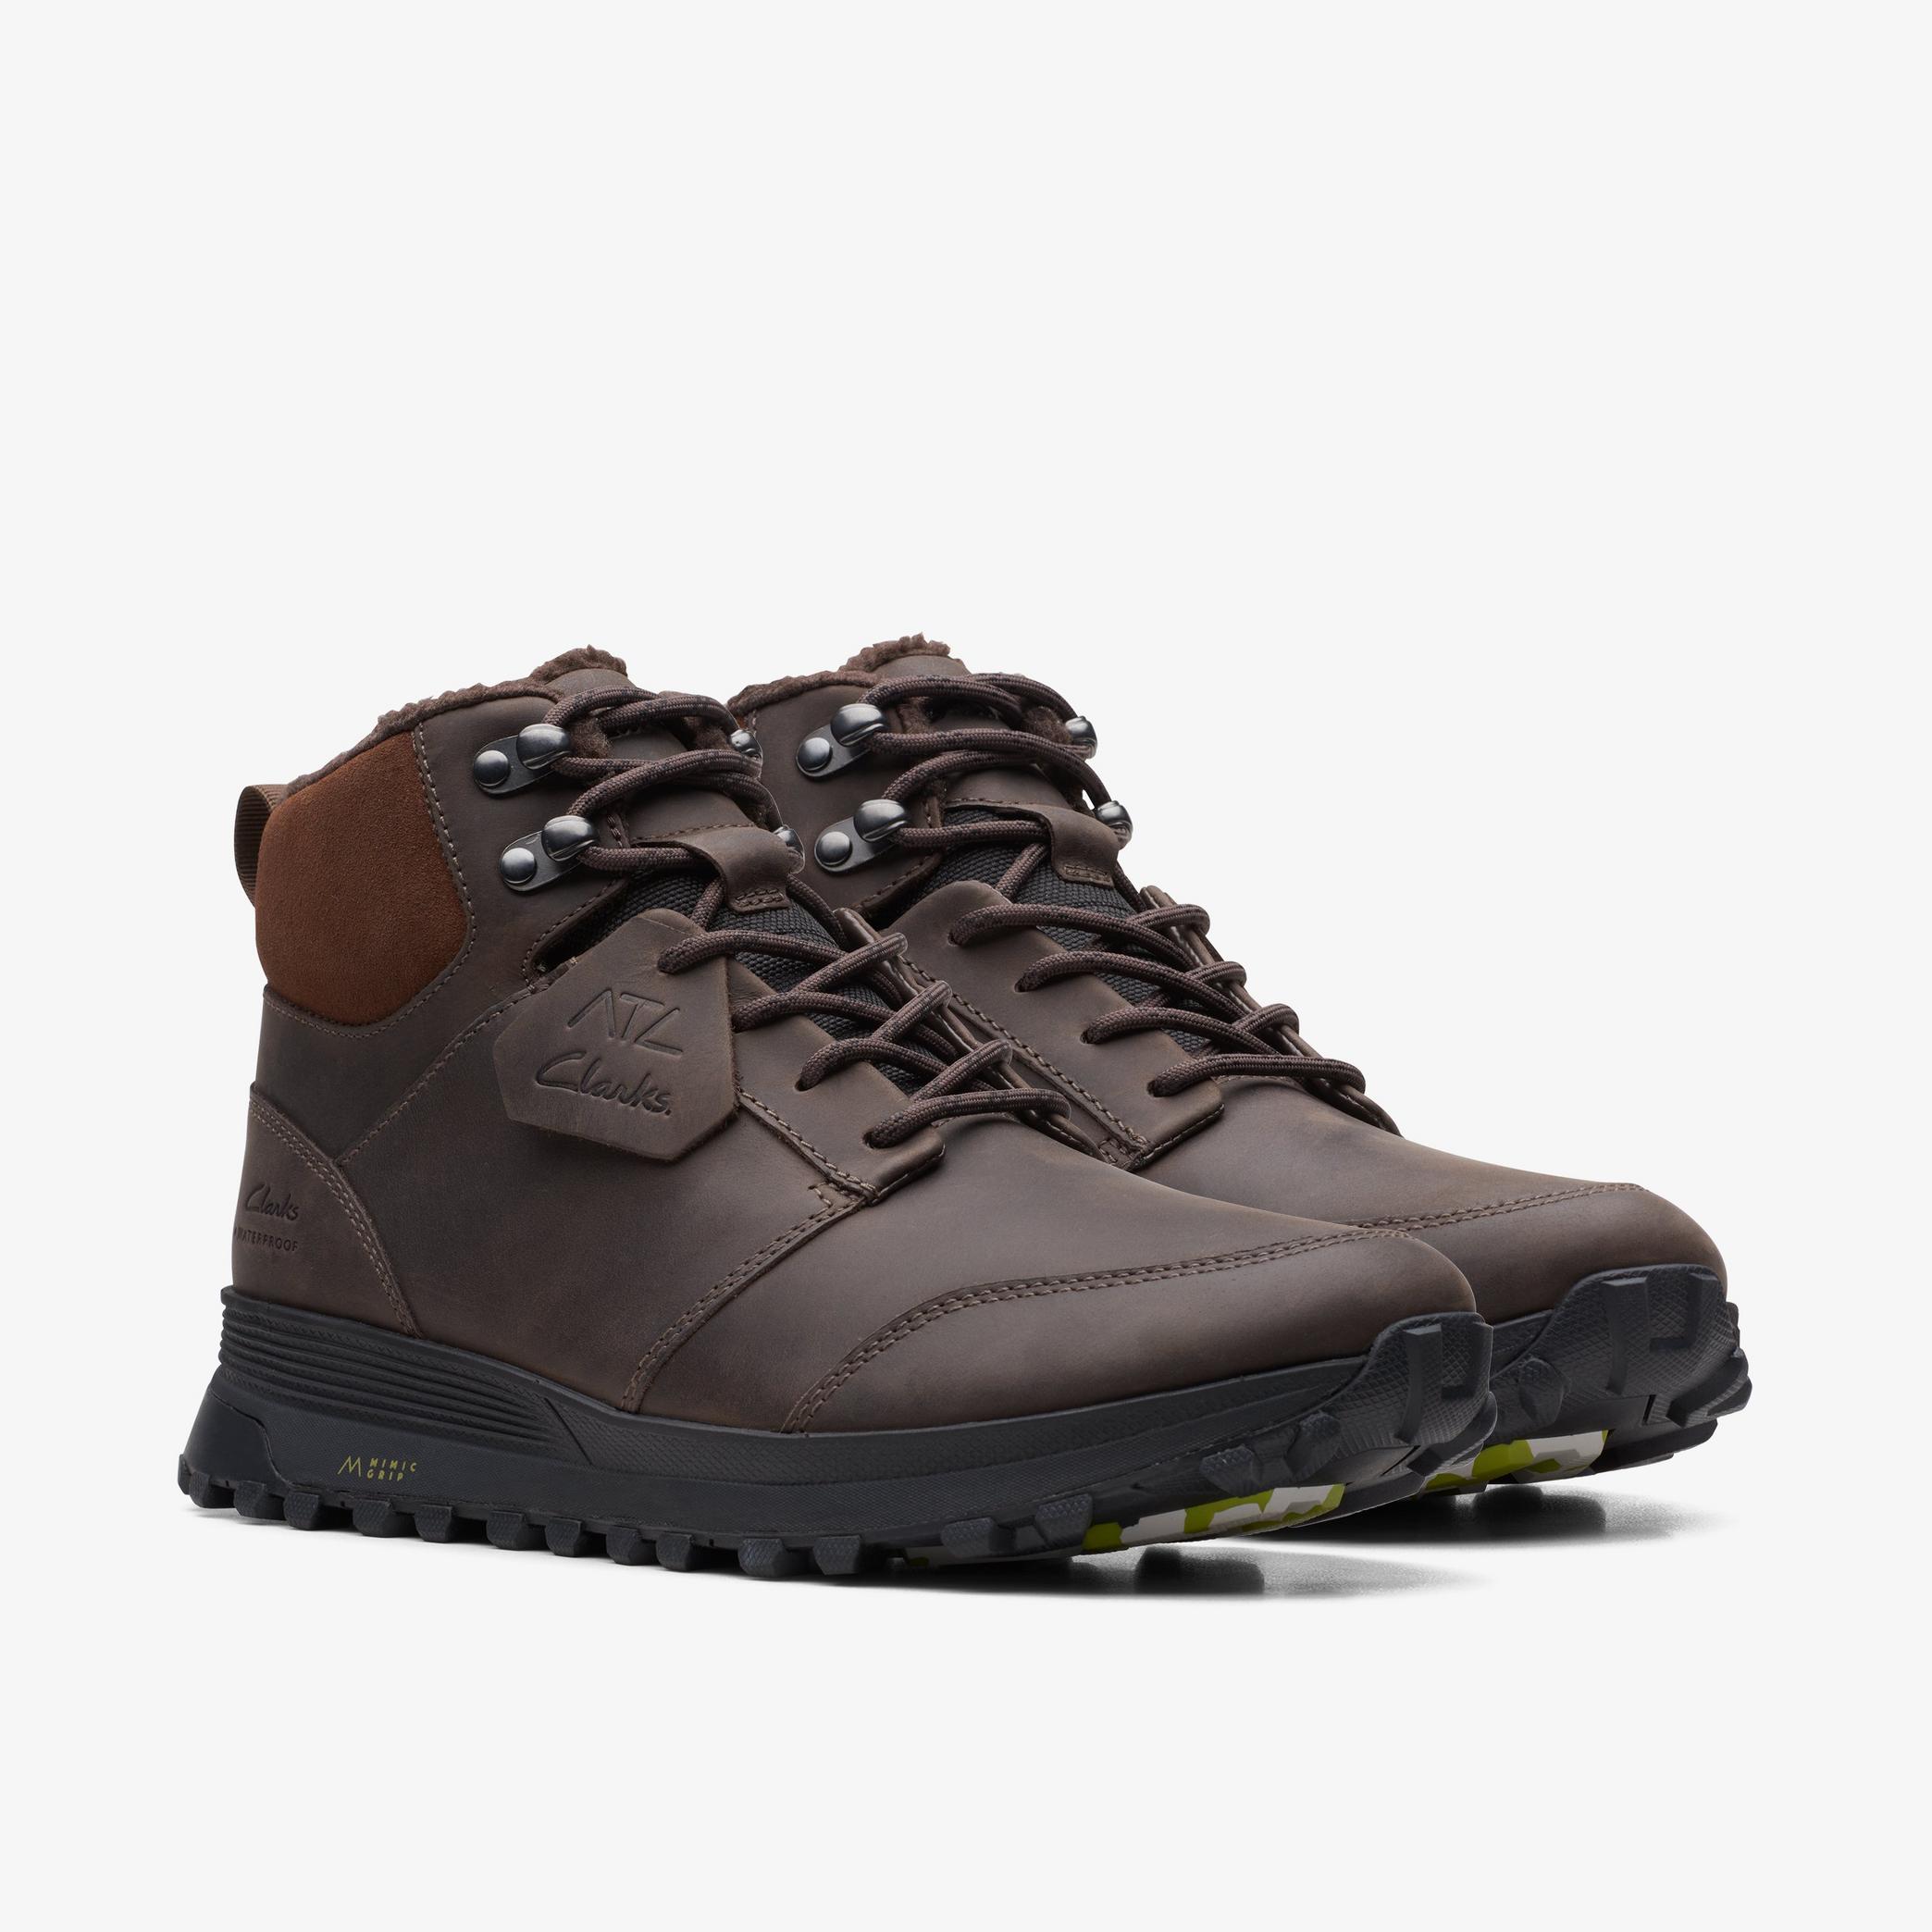 ATL Trek Up Waterproof Brown Warmlined Leather Ankle Boots, view 5 of 7